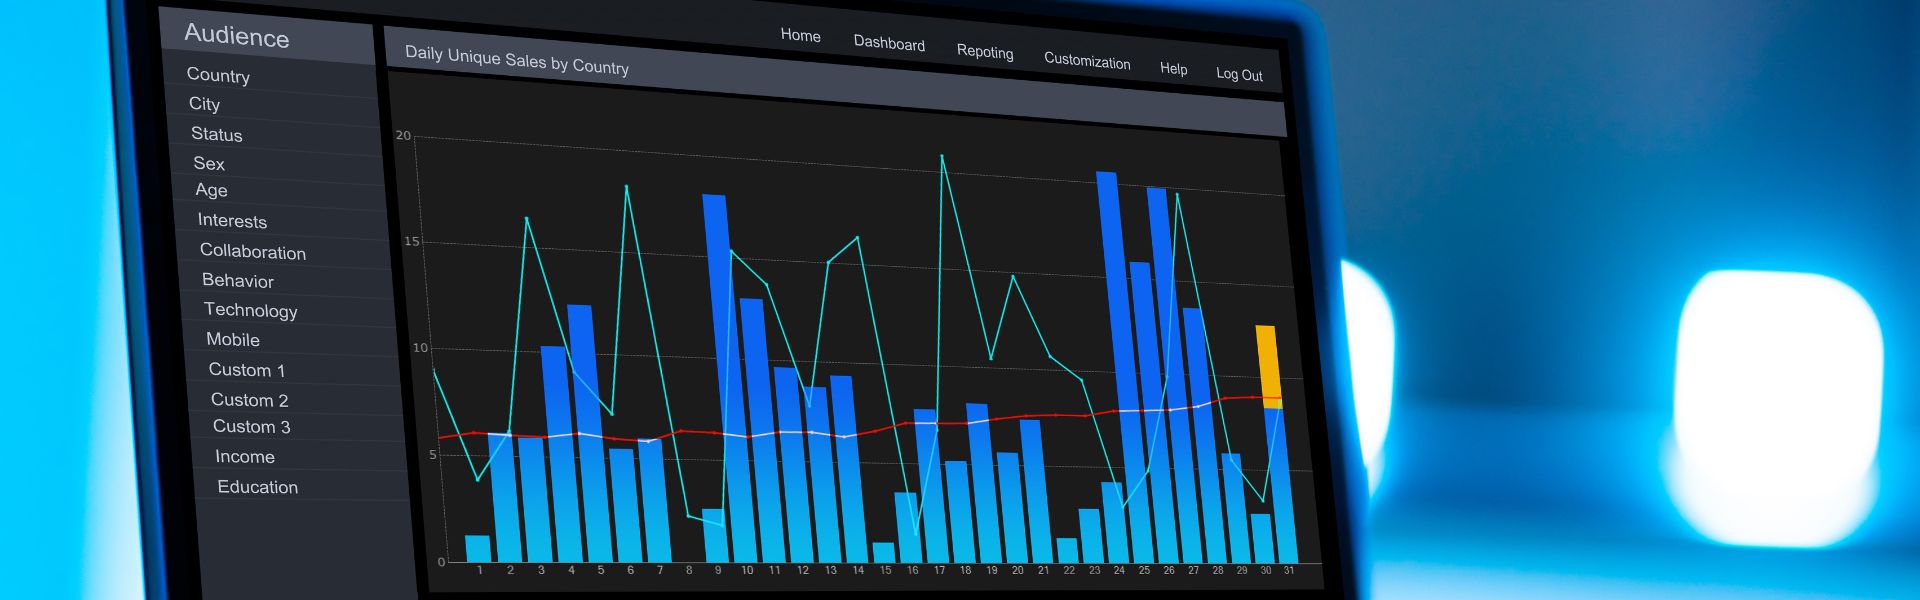 The Top 10 Tools for Audience Insights